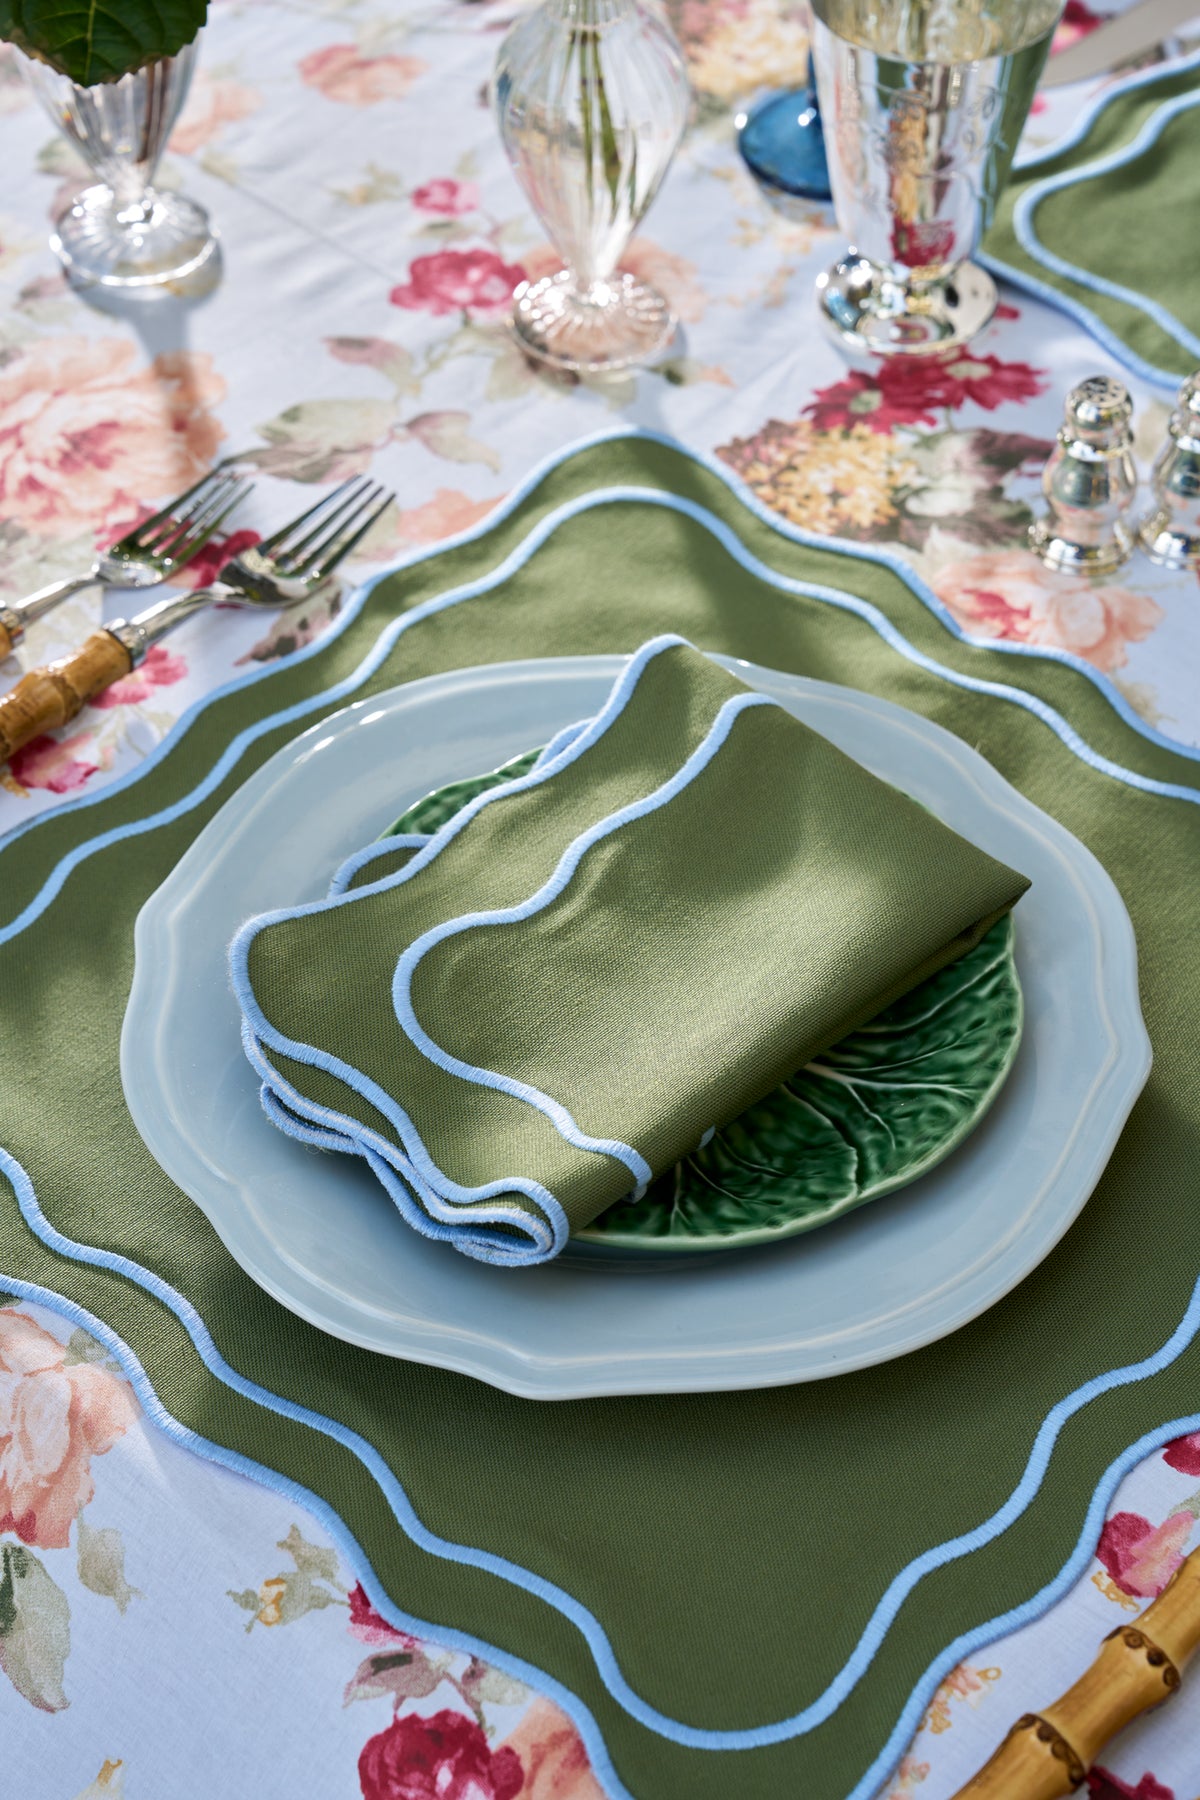 Amy Placemat in Green and Blue